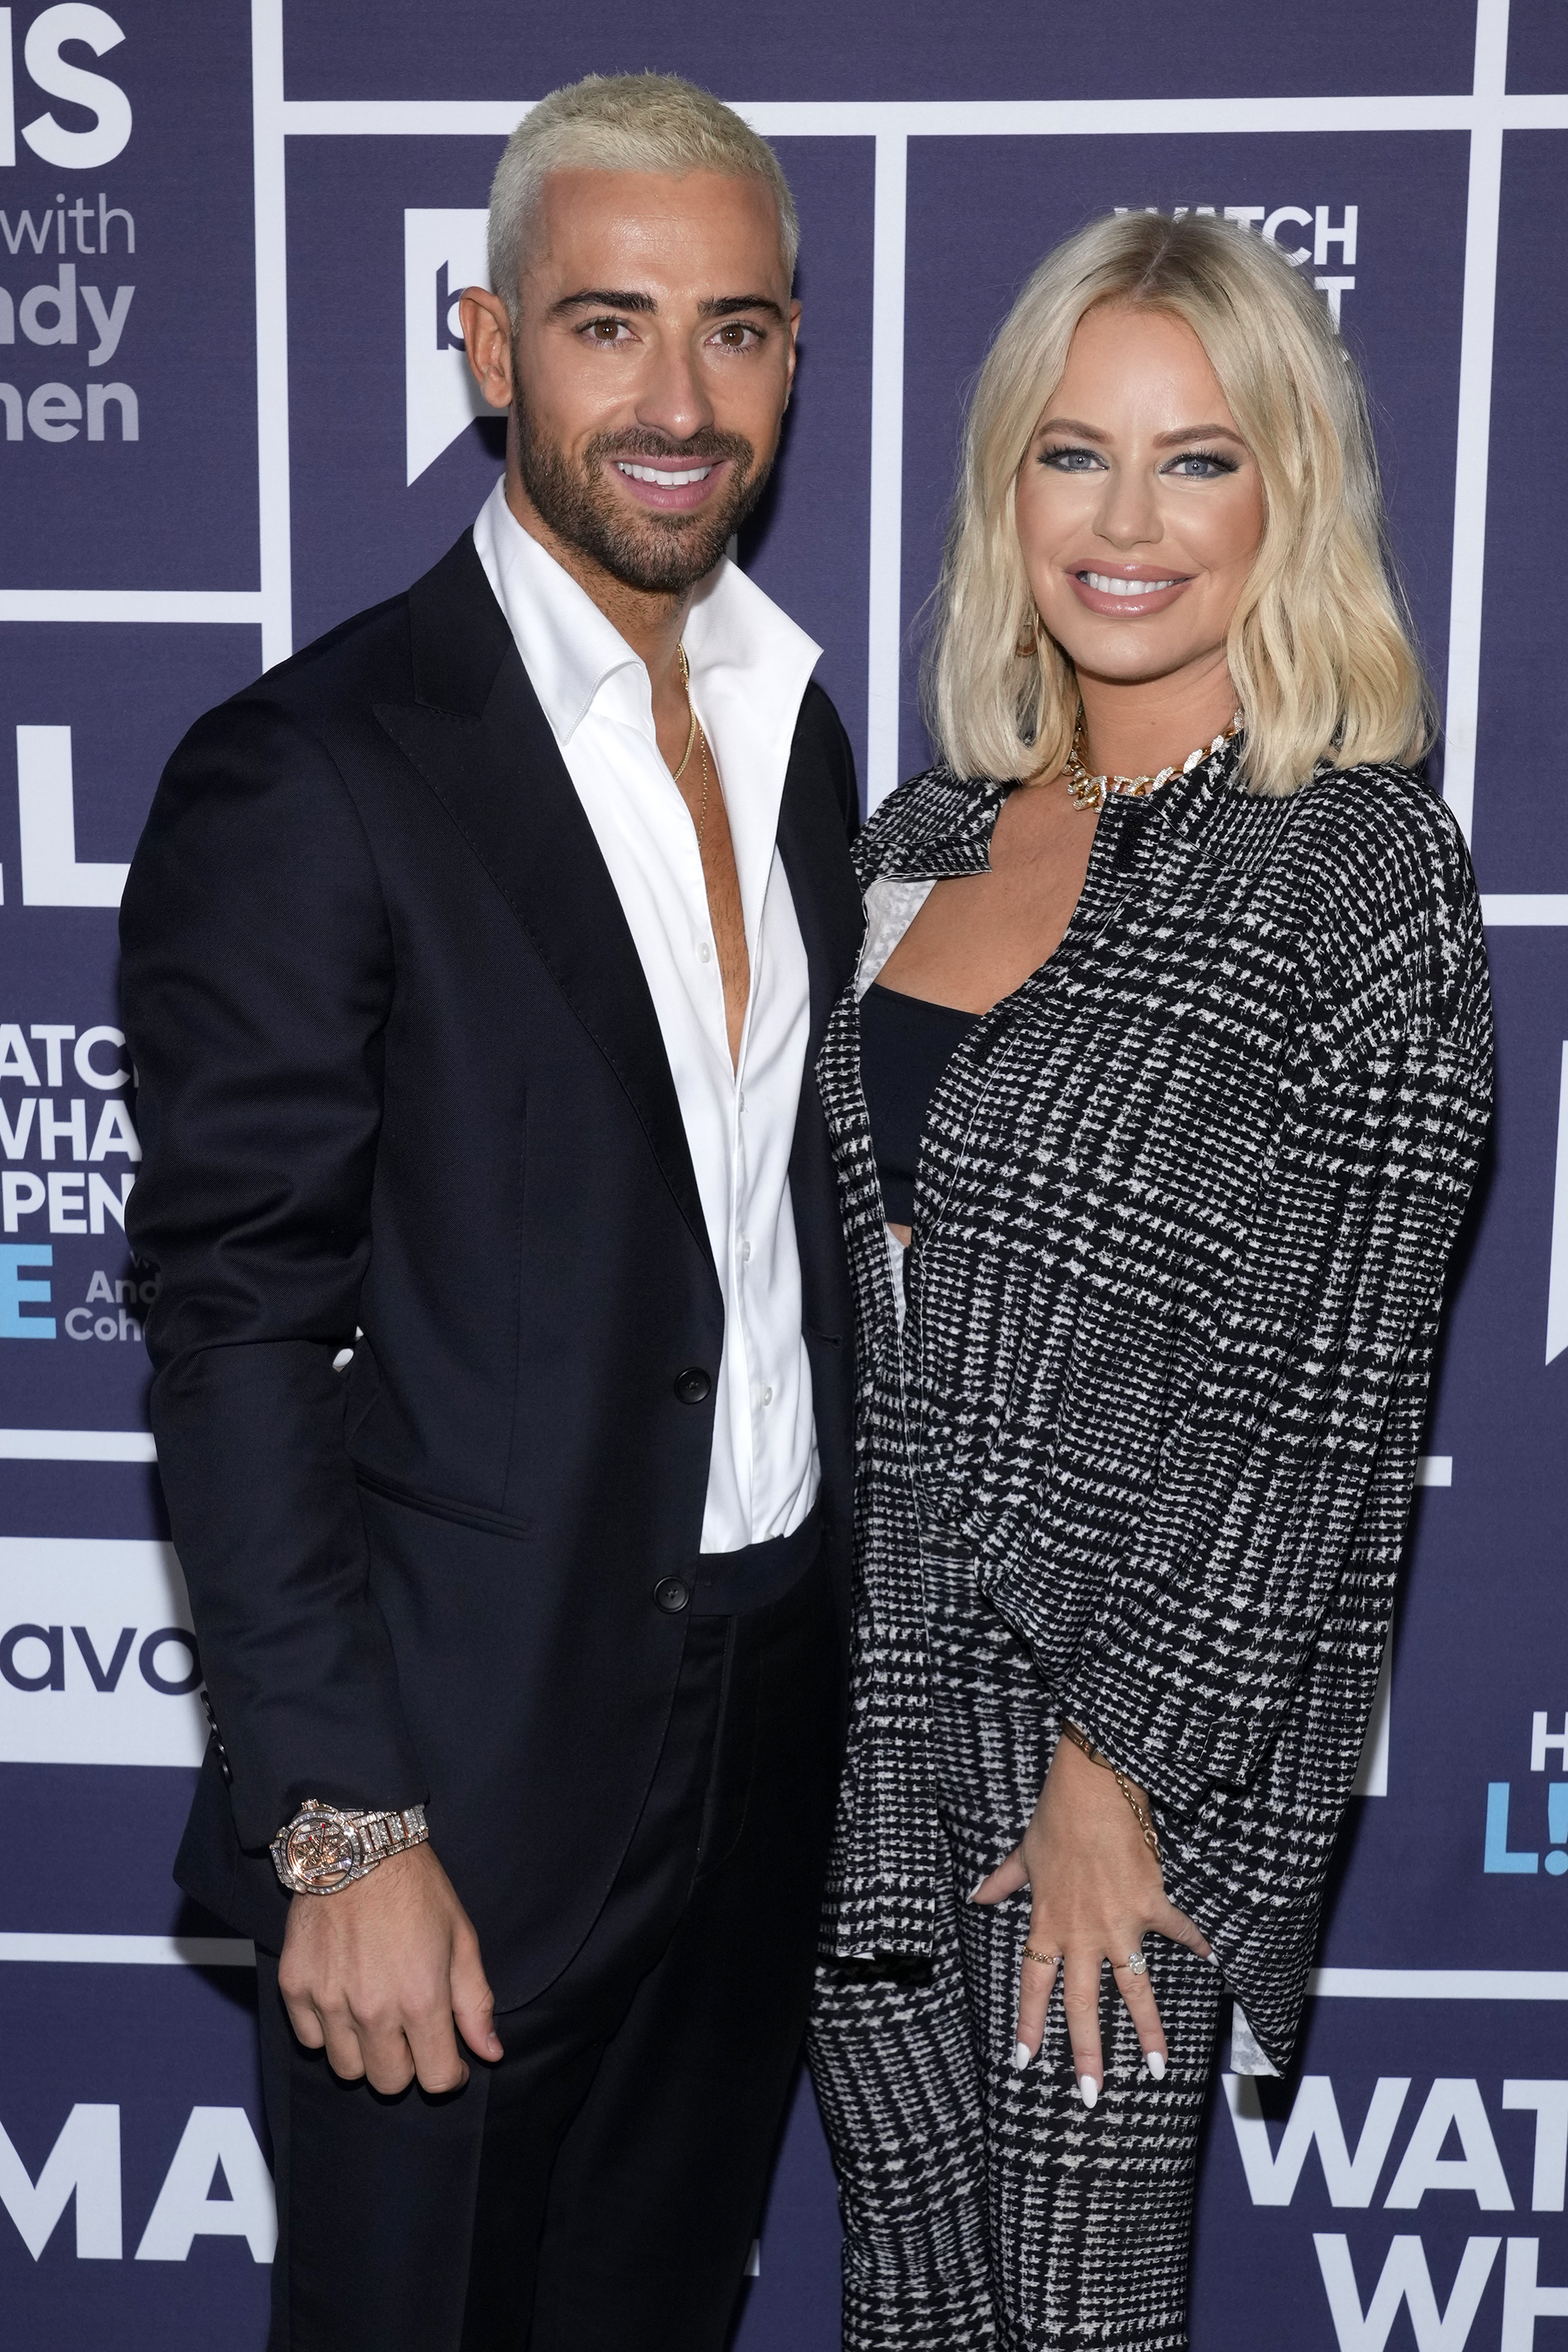 <p>"The Real Housewives of Dubai" star Caroline Stanbury was 45 when she married former Real Madrid soccer player Sergio Carrallo -- who was 27 at the time -- in 2021. "It's kind of like a do-over. I'm getting to, like, relive my youth again with him," the "Ladies of London" alum told <a href="https://www.womenshealthmag.com/life/a40110220/real-housewives-of-dubai-caroline-stanbury/">Women's Health</a> a few months after tying the knot with the athlete, who's more than 18 years her junior. "There aren't many women in the Middle East married to a man that's 20 years younger. But there are a lot of men married to women that are 20 years younger. So I'm definitely breaking a social norm," she acknowledged of their age gap.</p>